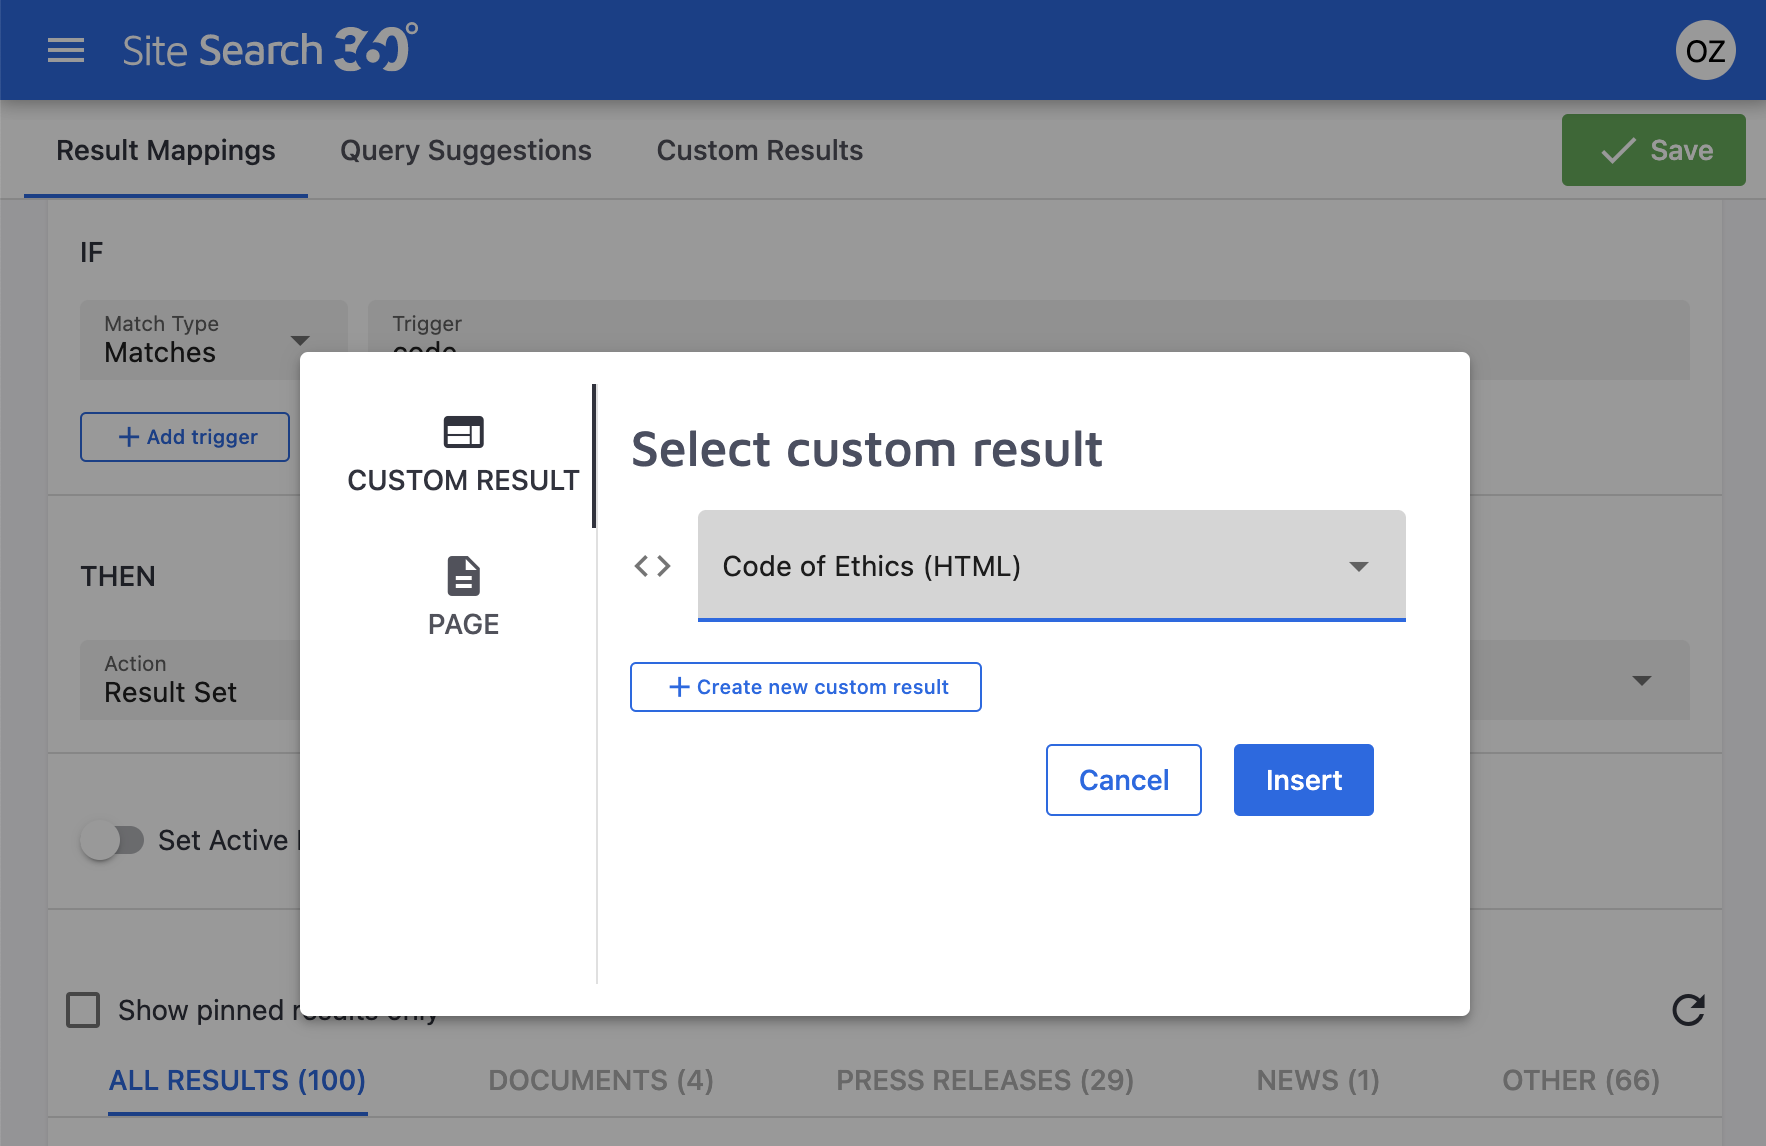 select a custom result to add to your result mapping